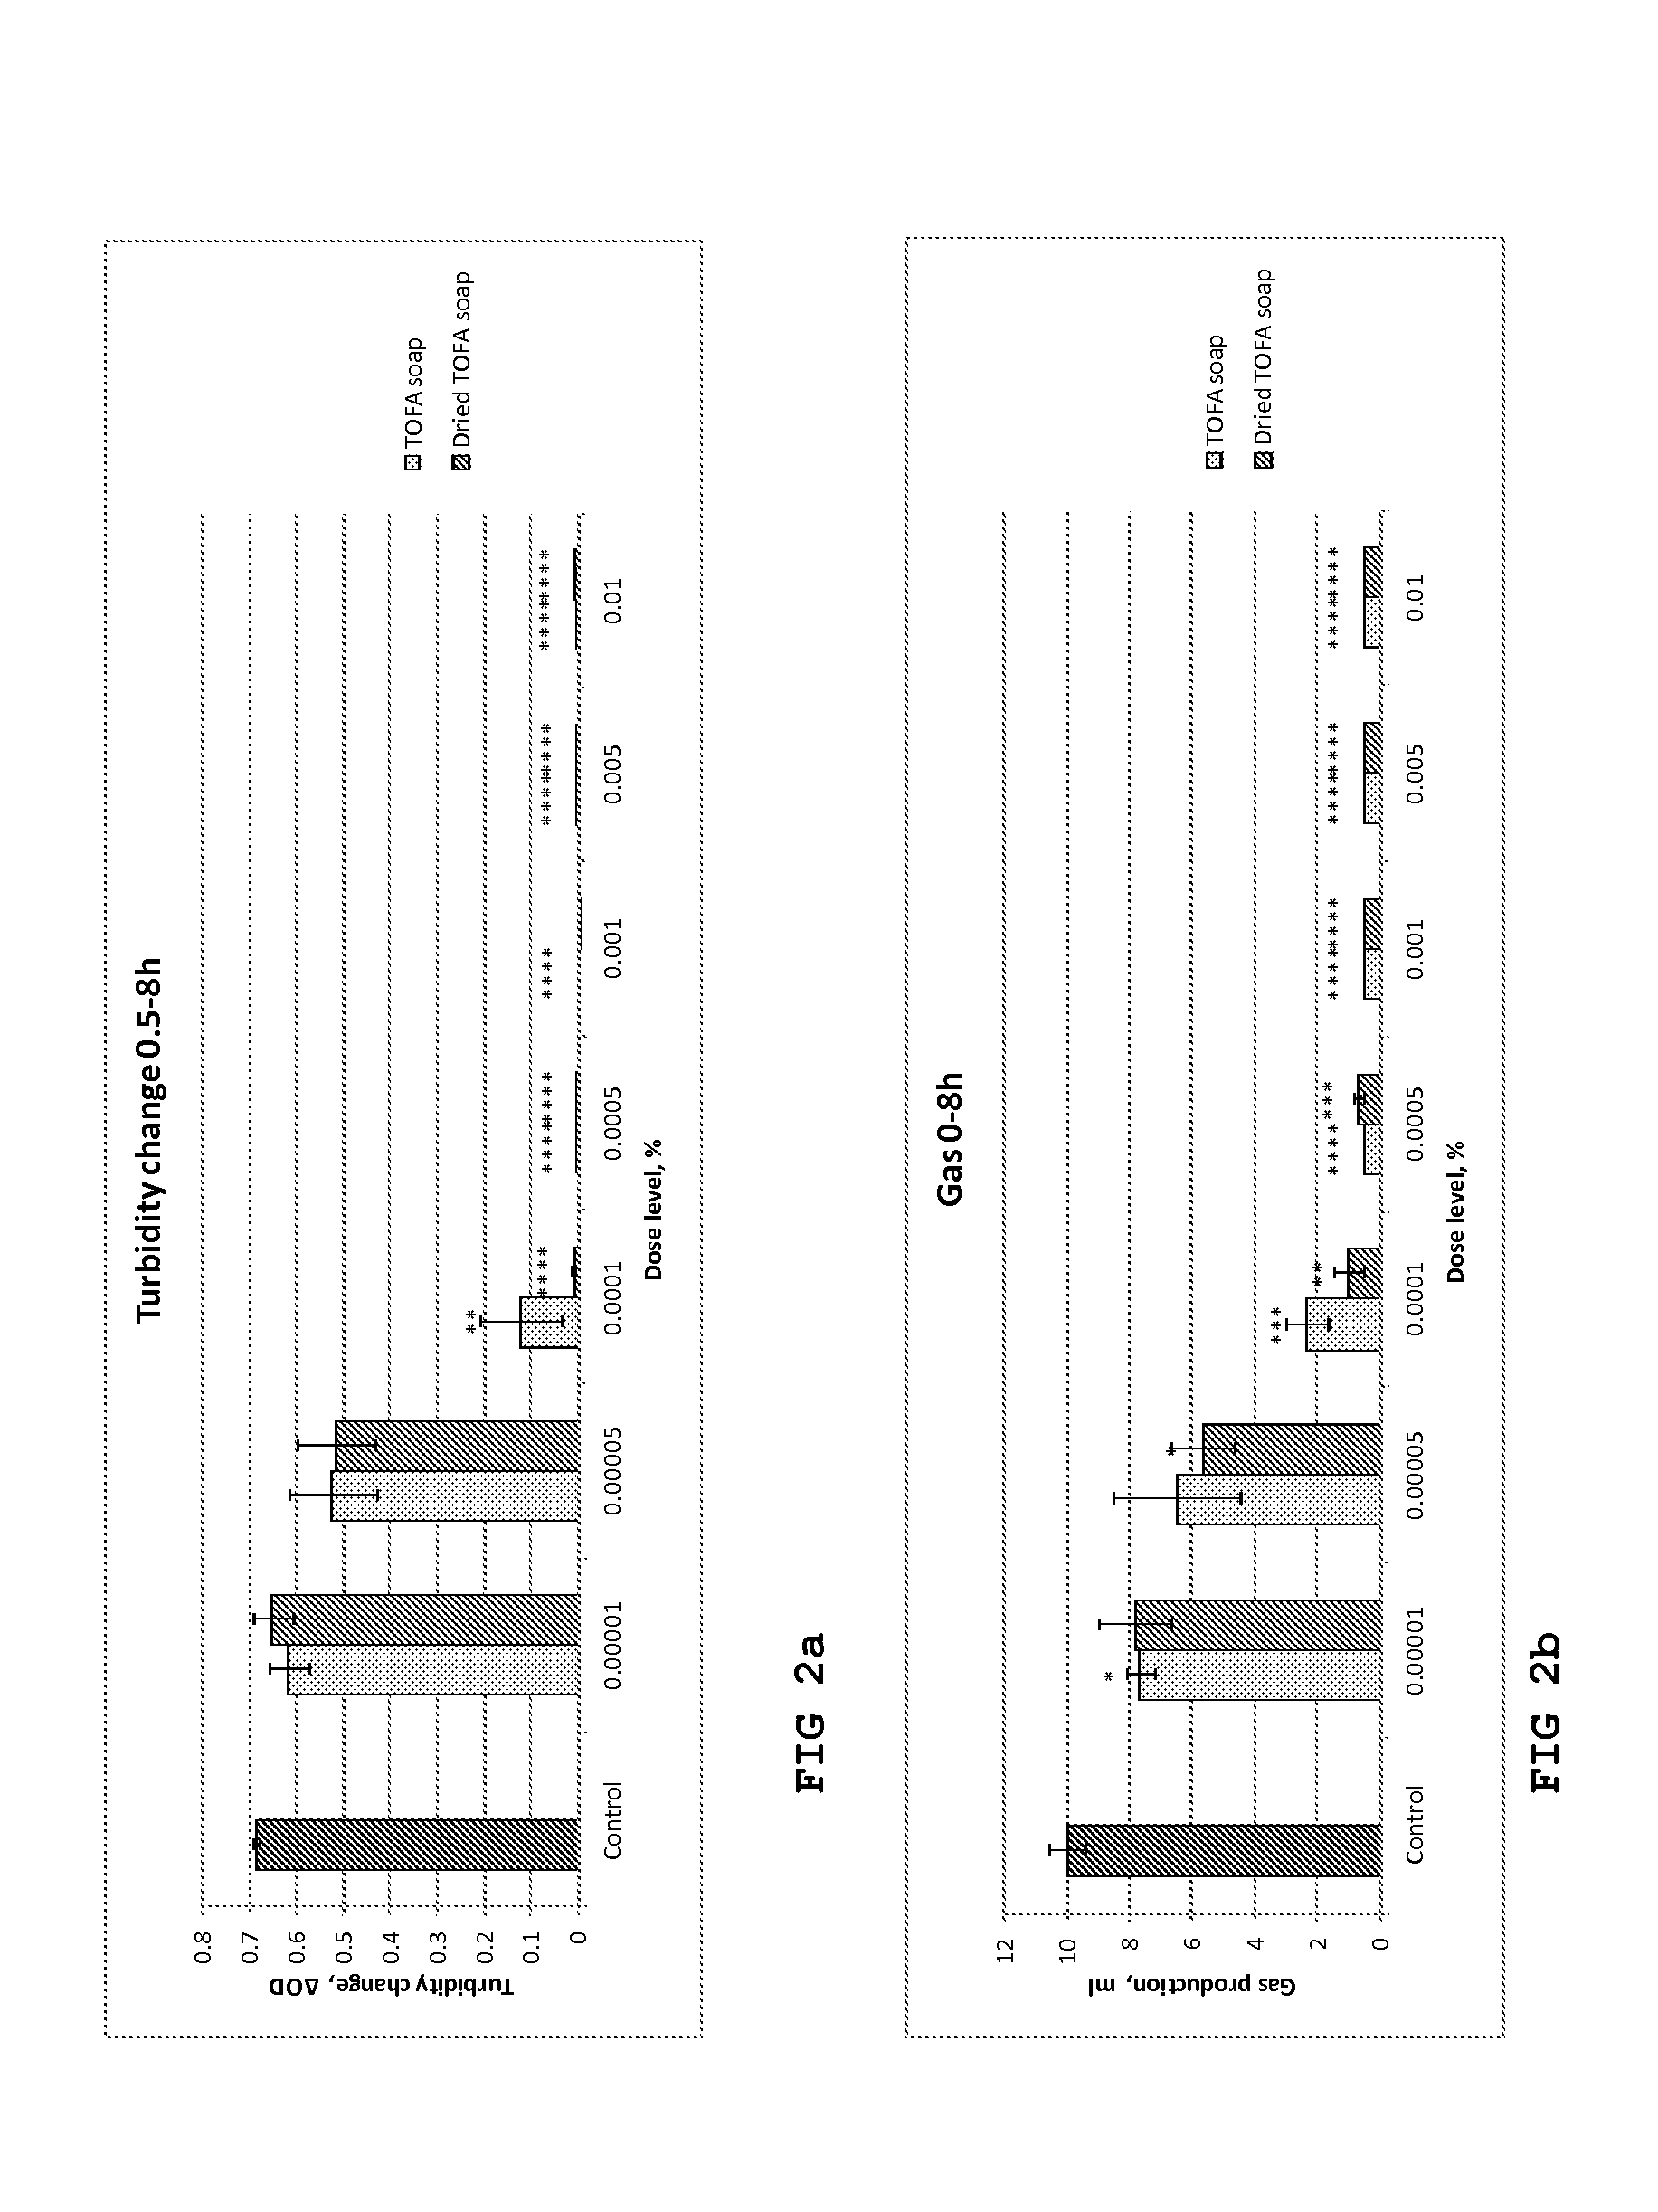 Saponified tall oil fatty acid for use in treatment and animal feed supplements and compositions